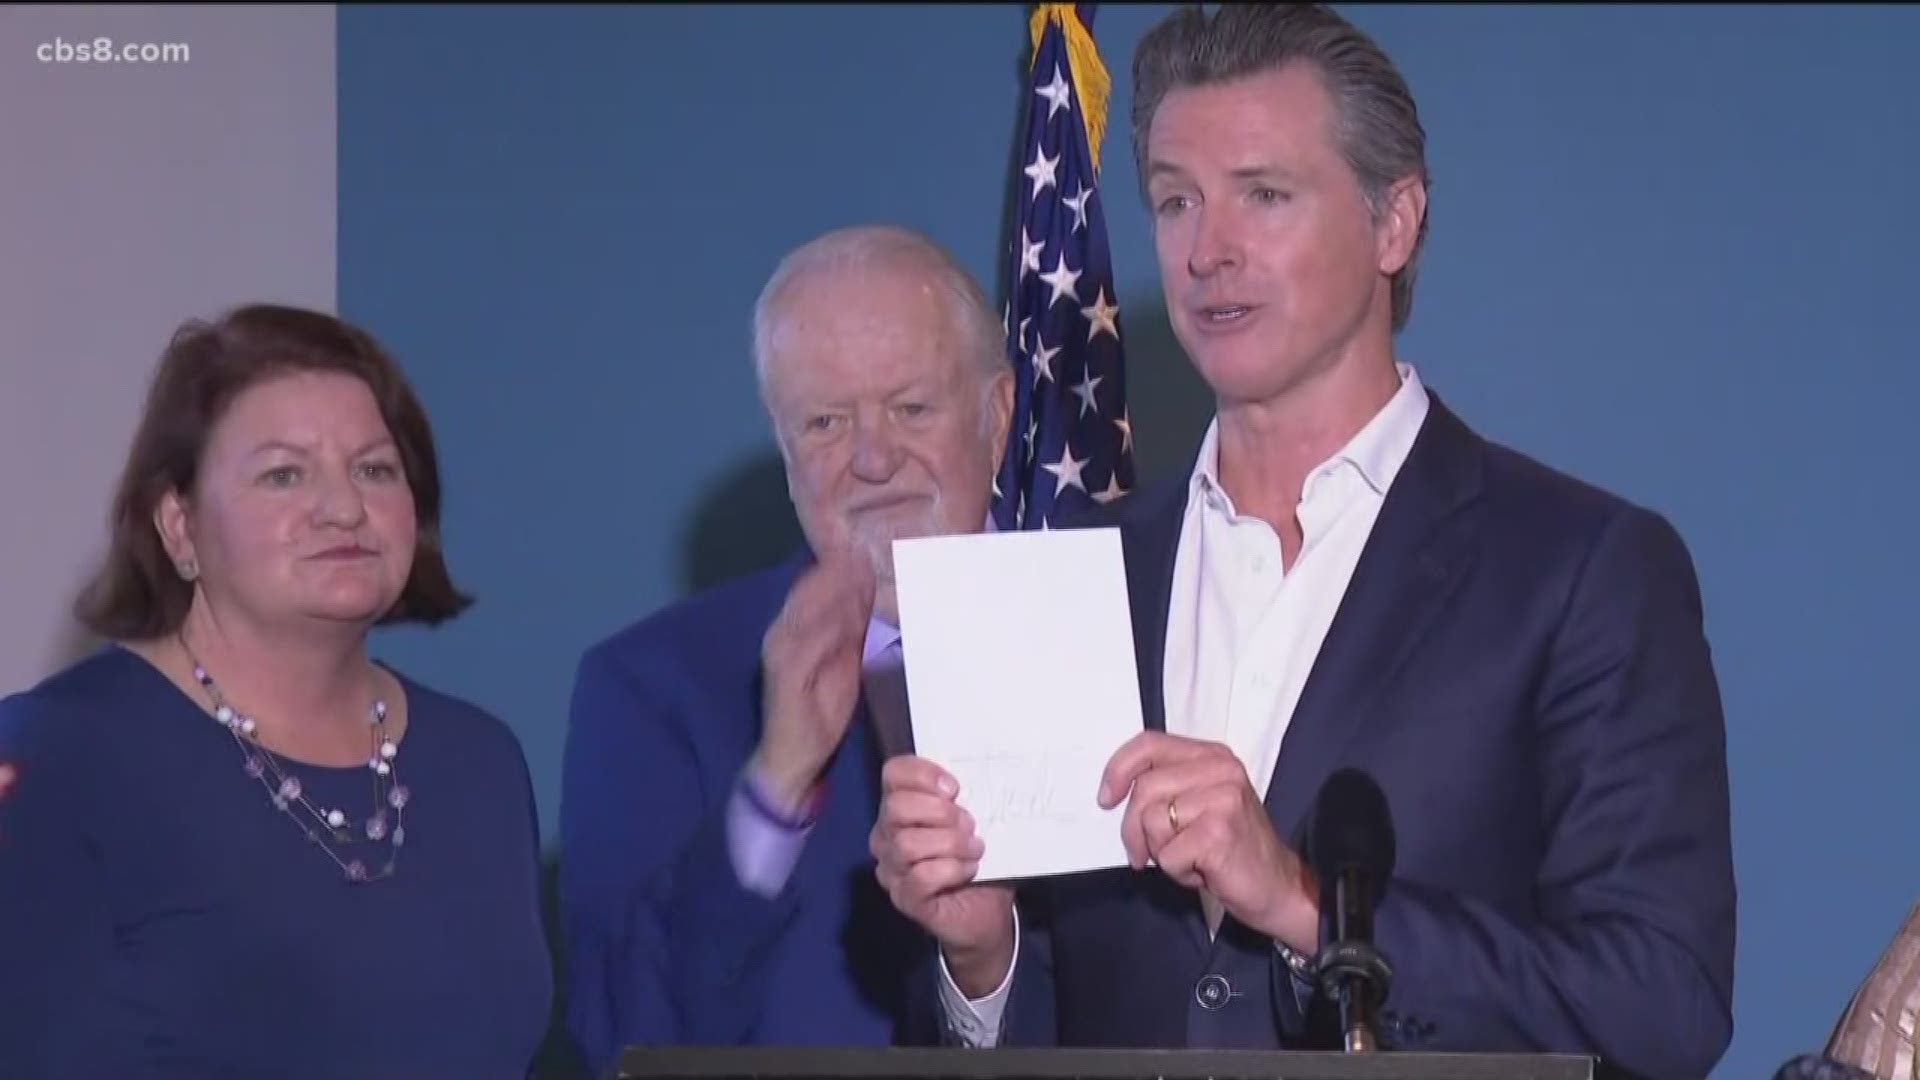 Newsom signed SB 113, which will enable the transfer of $331 million in state funds for borrower relief and legal aid to homeowners and renters.